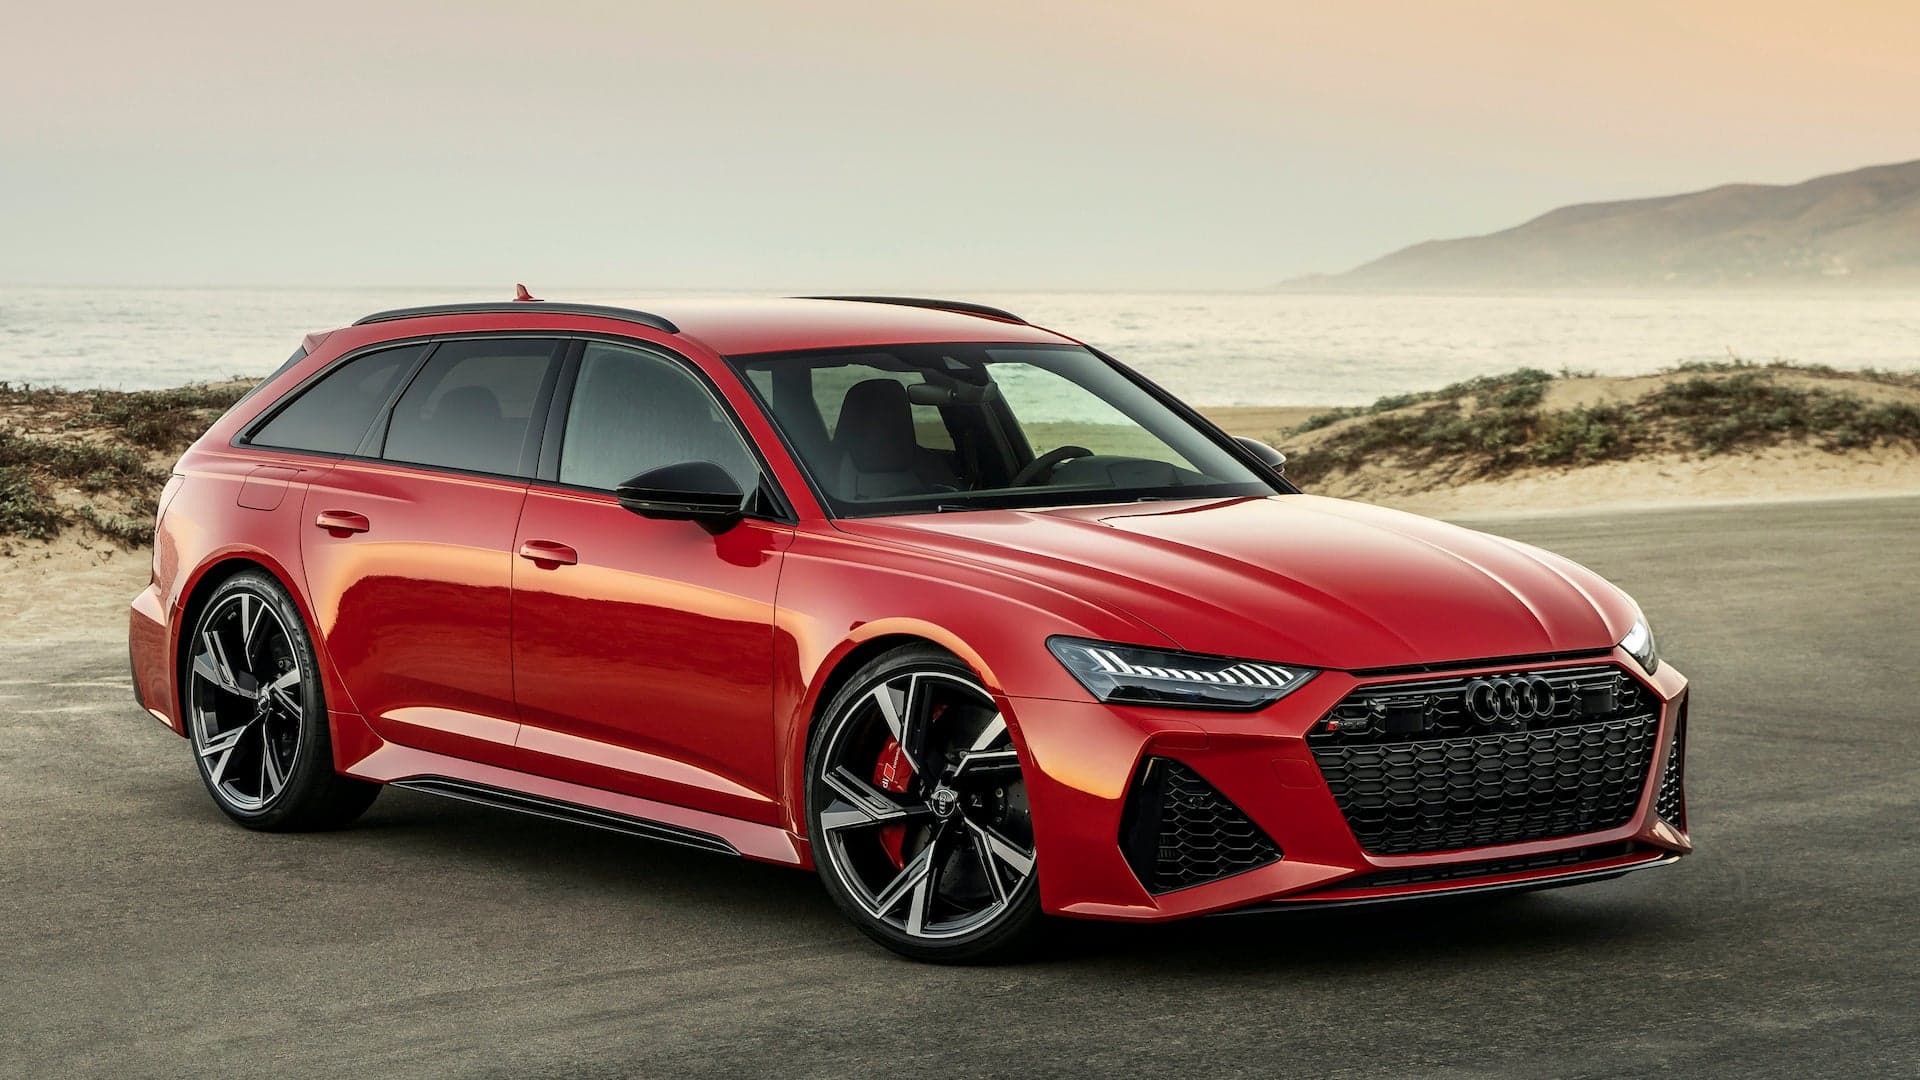 Order-Only 2021 Audi RS6 Avant Super-Wagon Will Start at $110,000